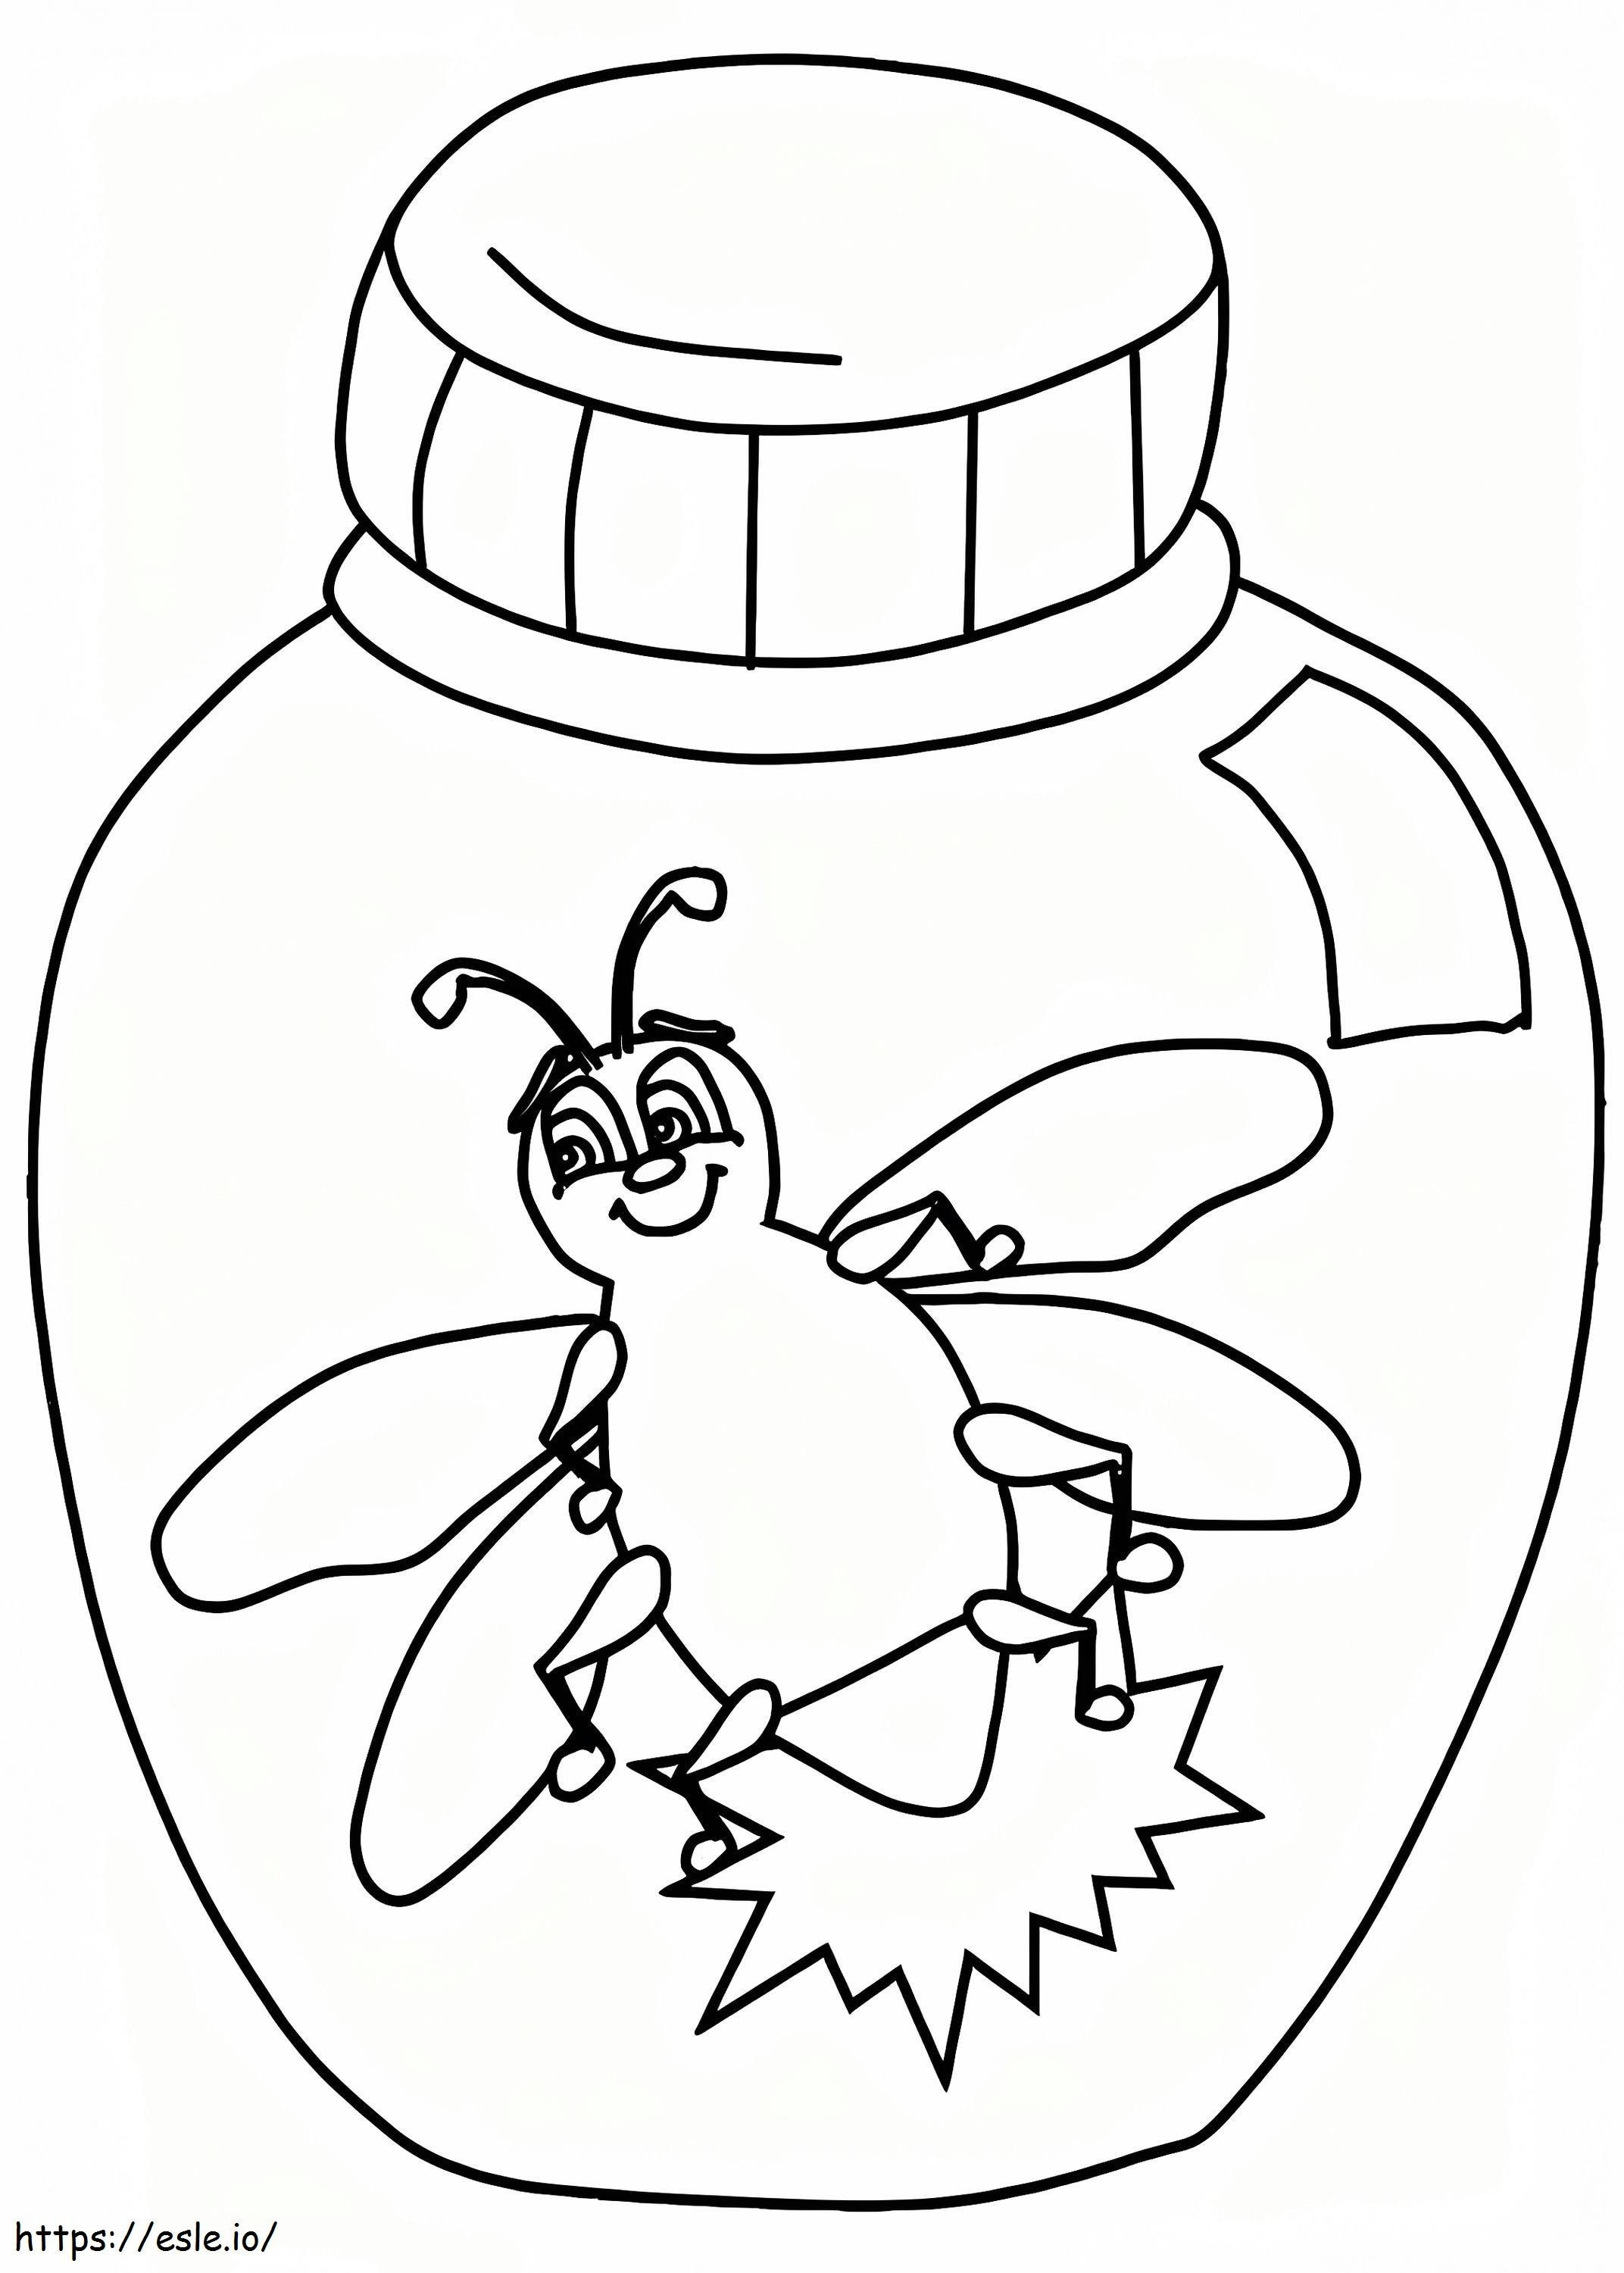 Firefly In A Jar coloring page